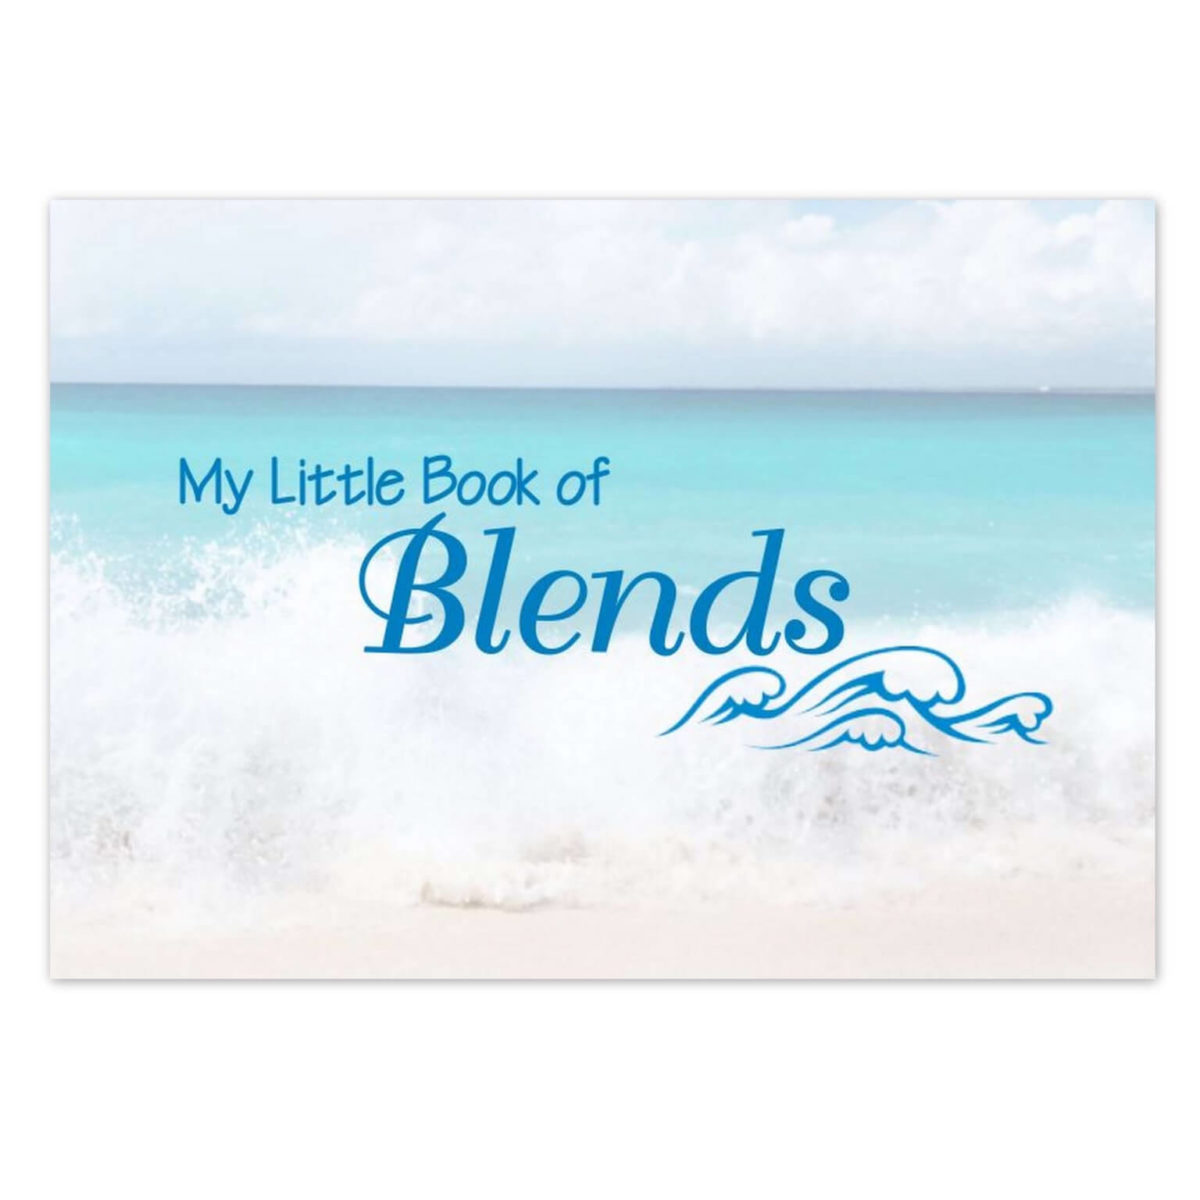 A5 landscape size book with crashing waves beach scene background and the text 'my little book of blends'